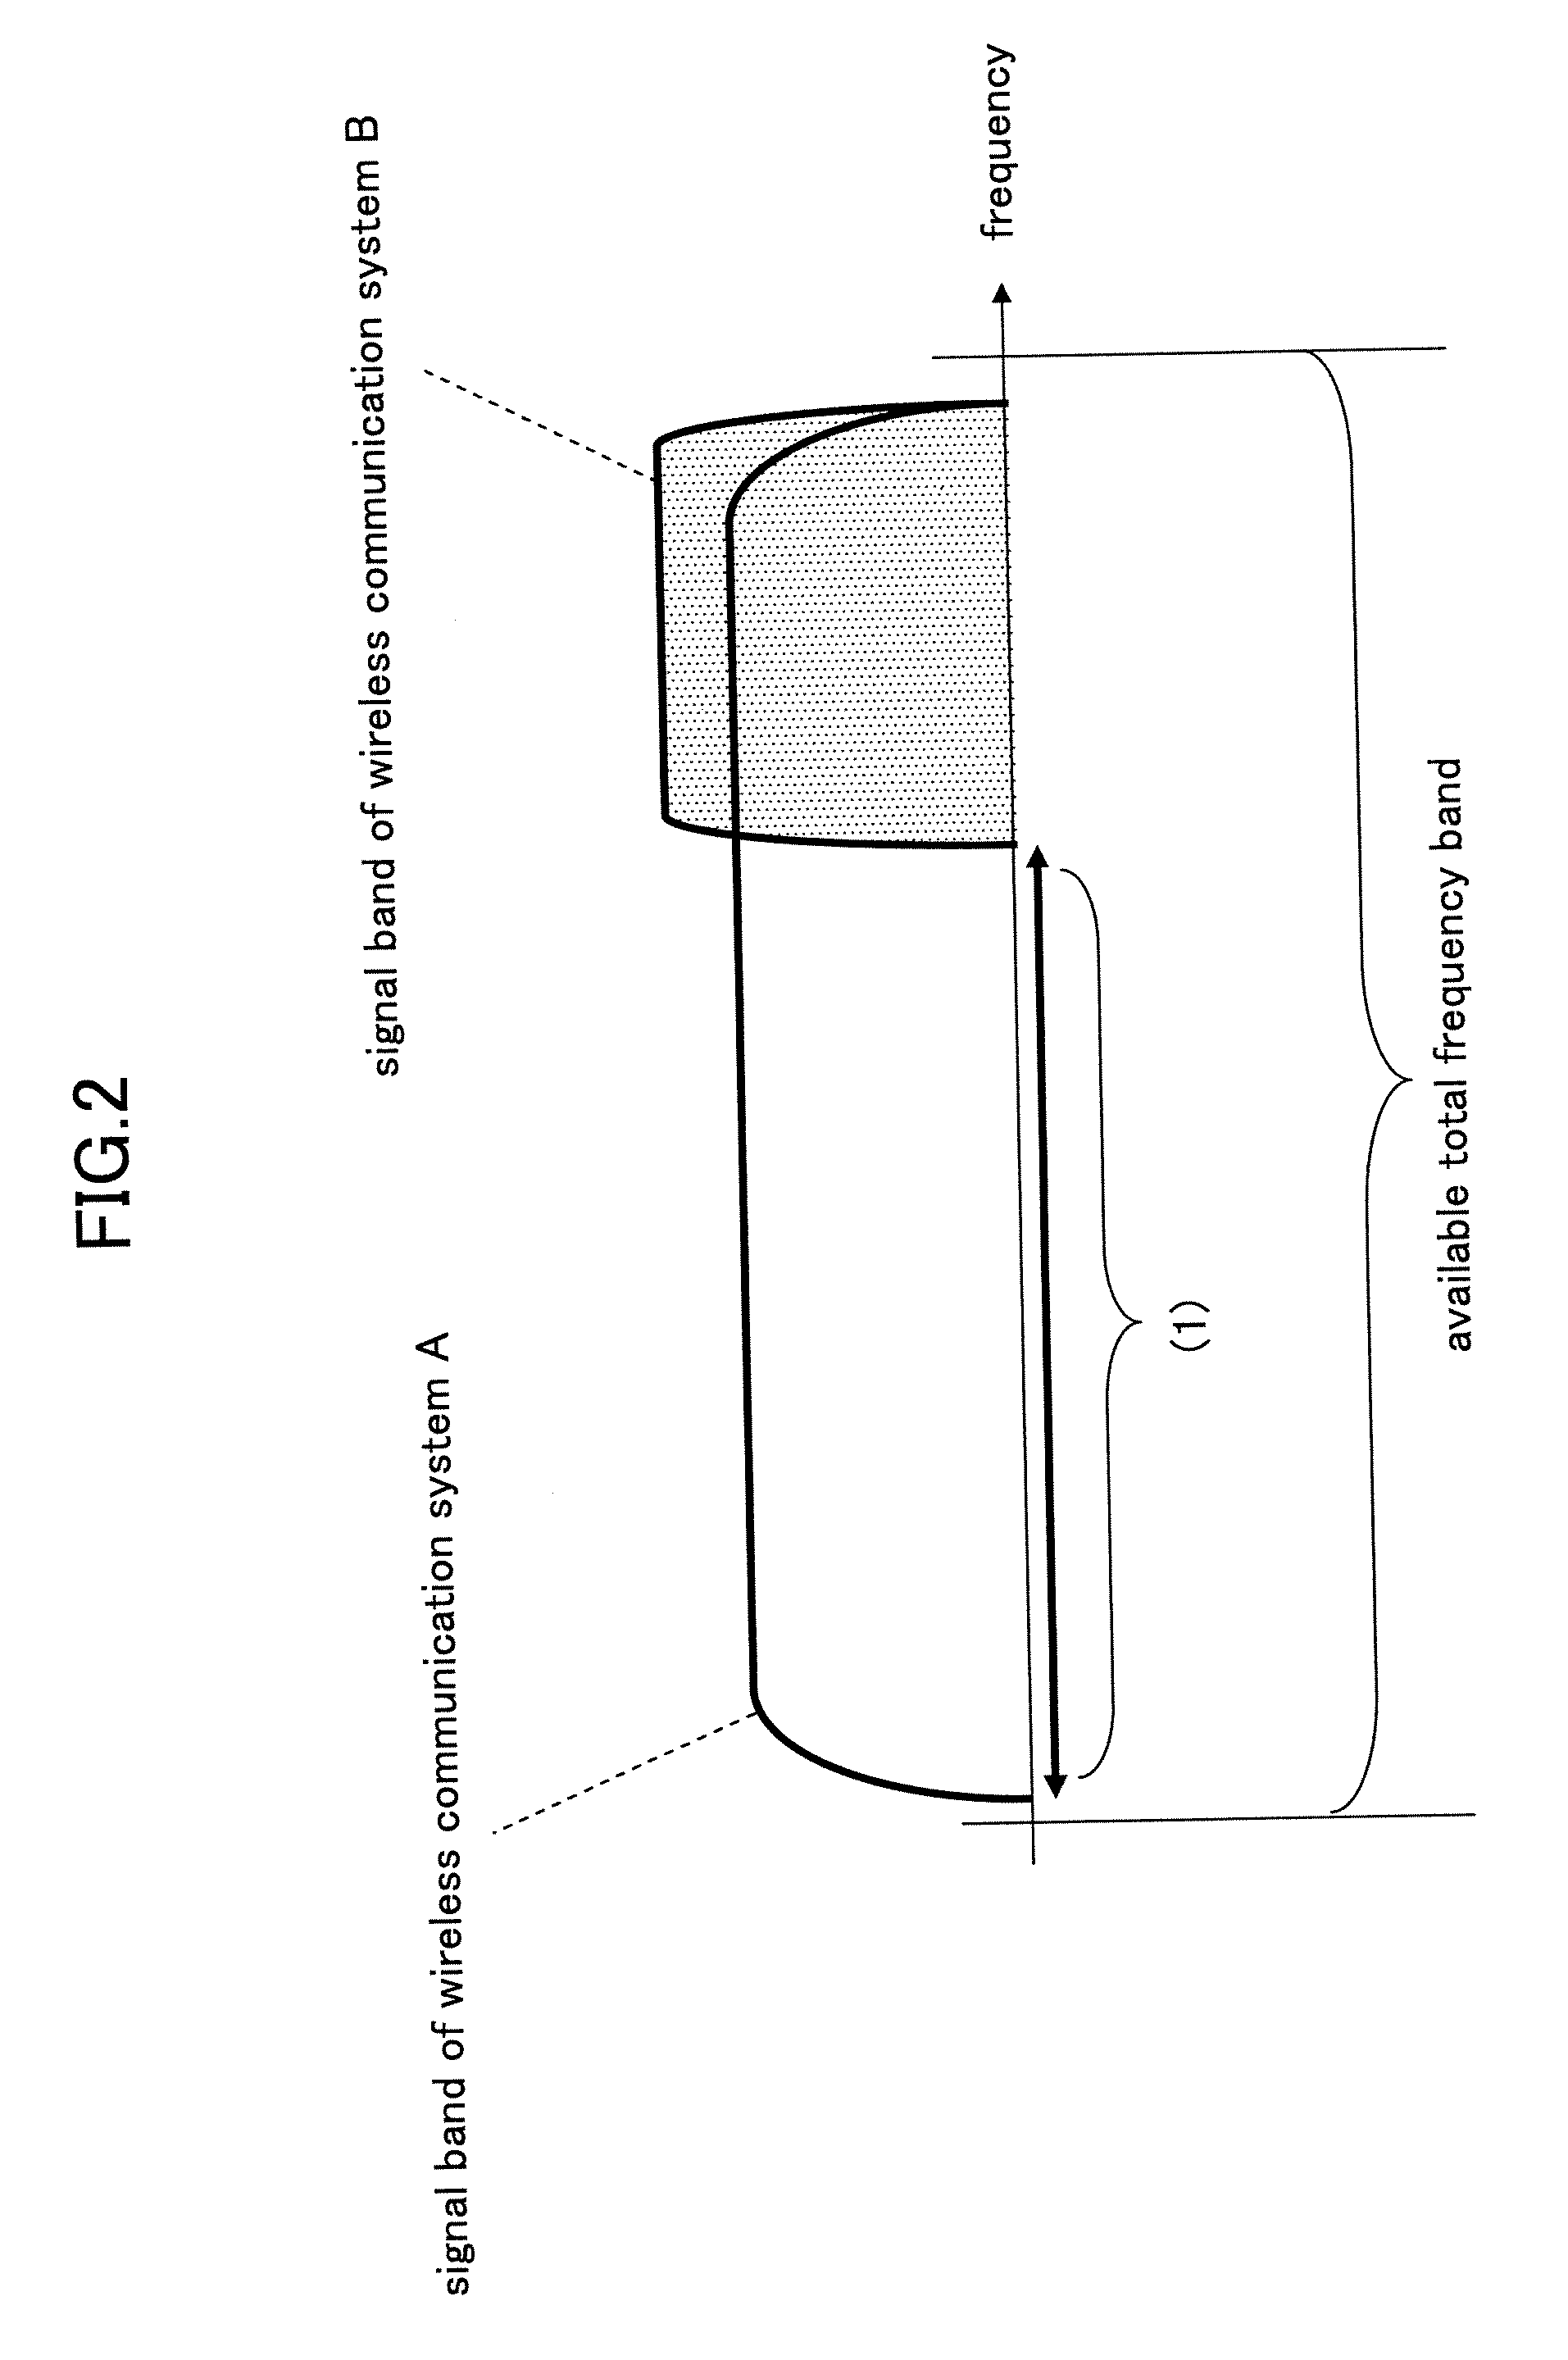 Signal frequency band detection device